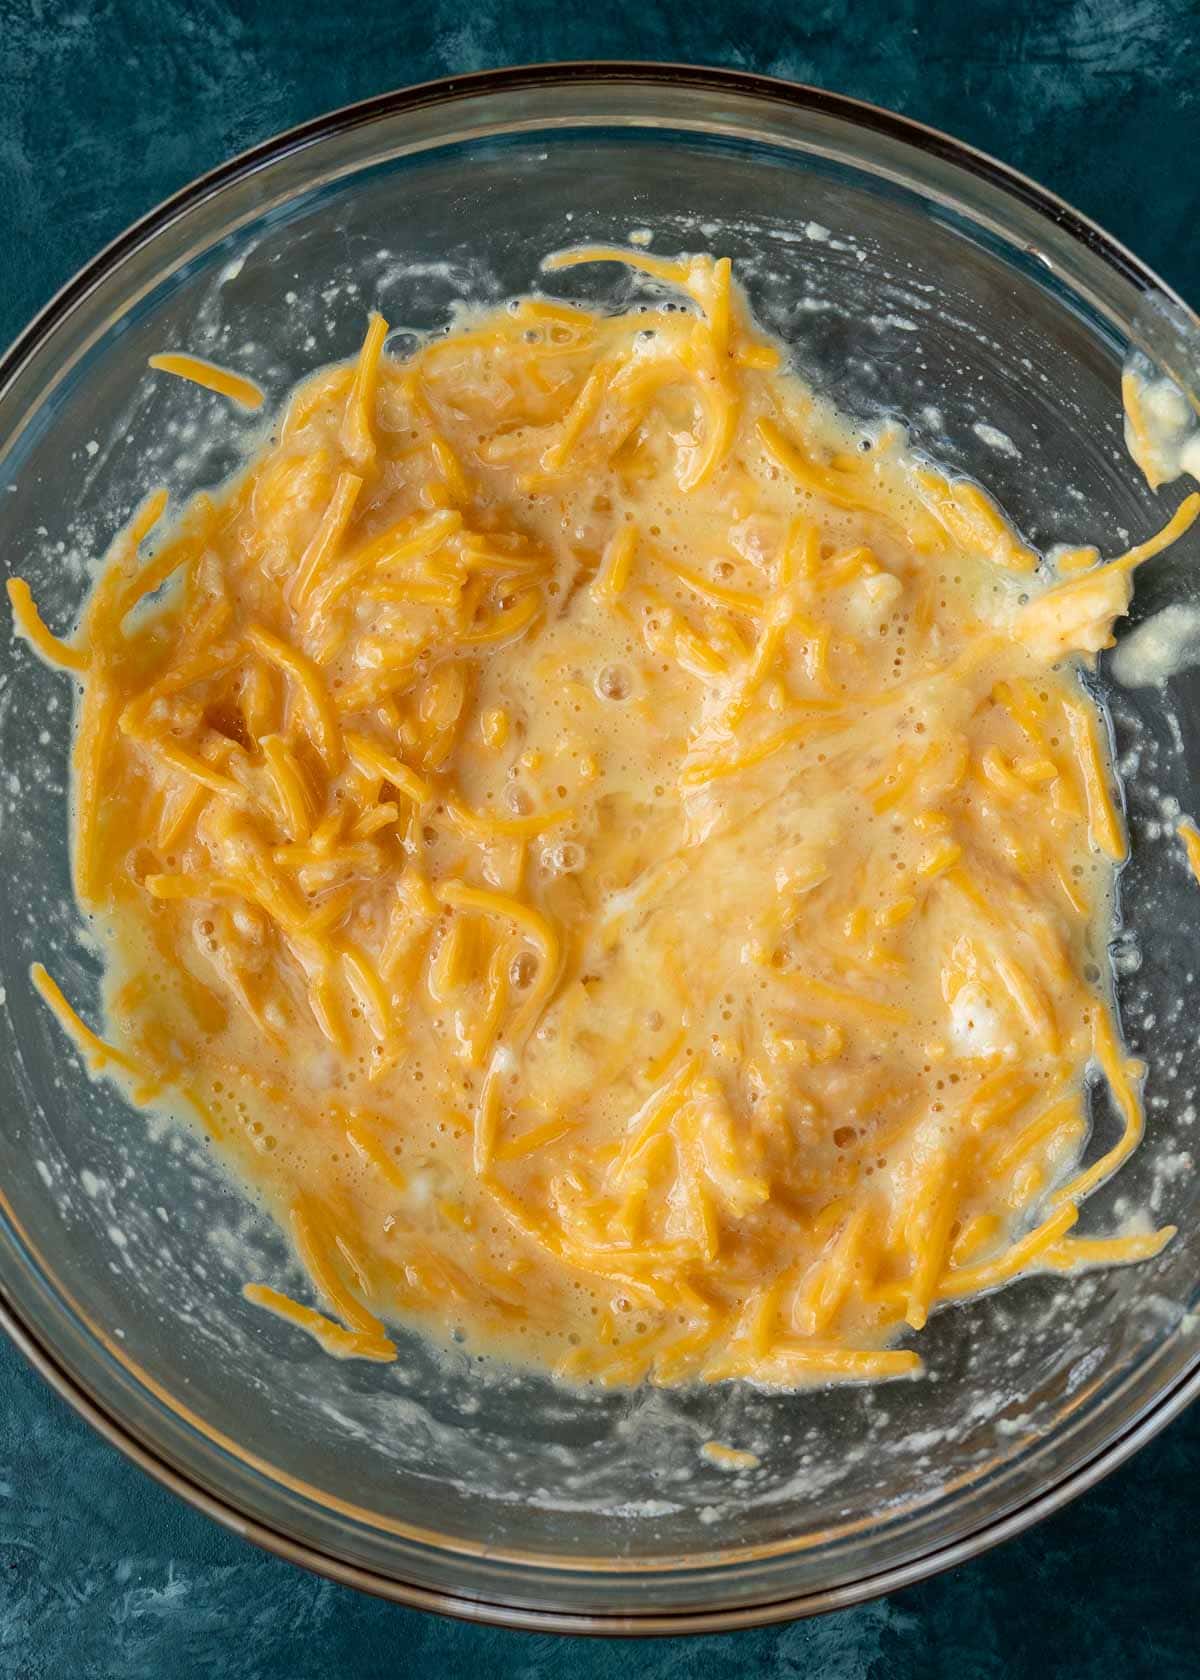 eggs whisked with almond flour, baking powder, and shredded cheese in a glass bowl